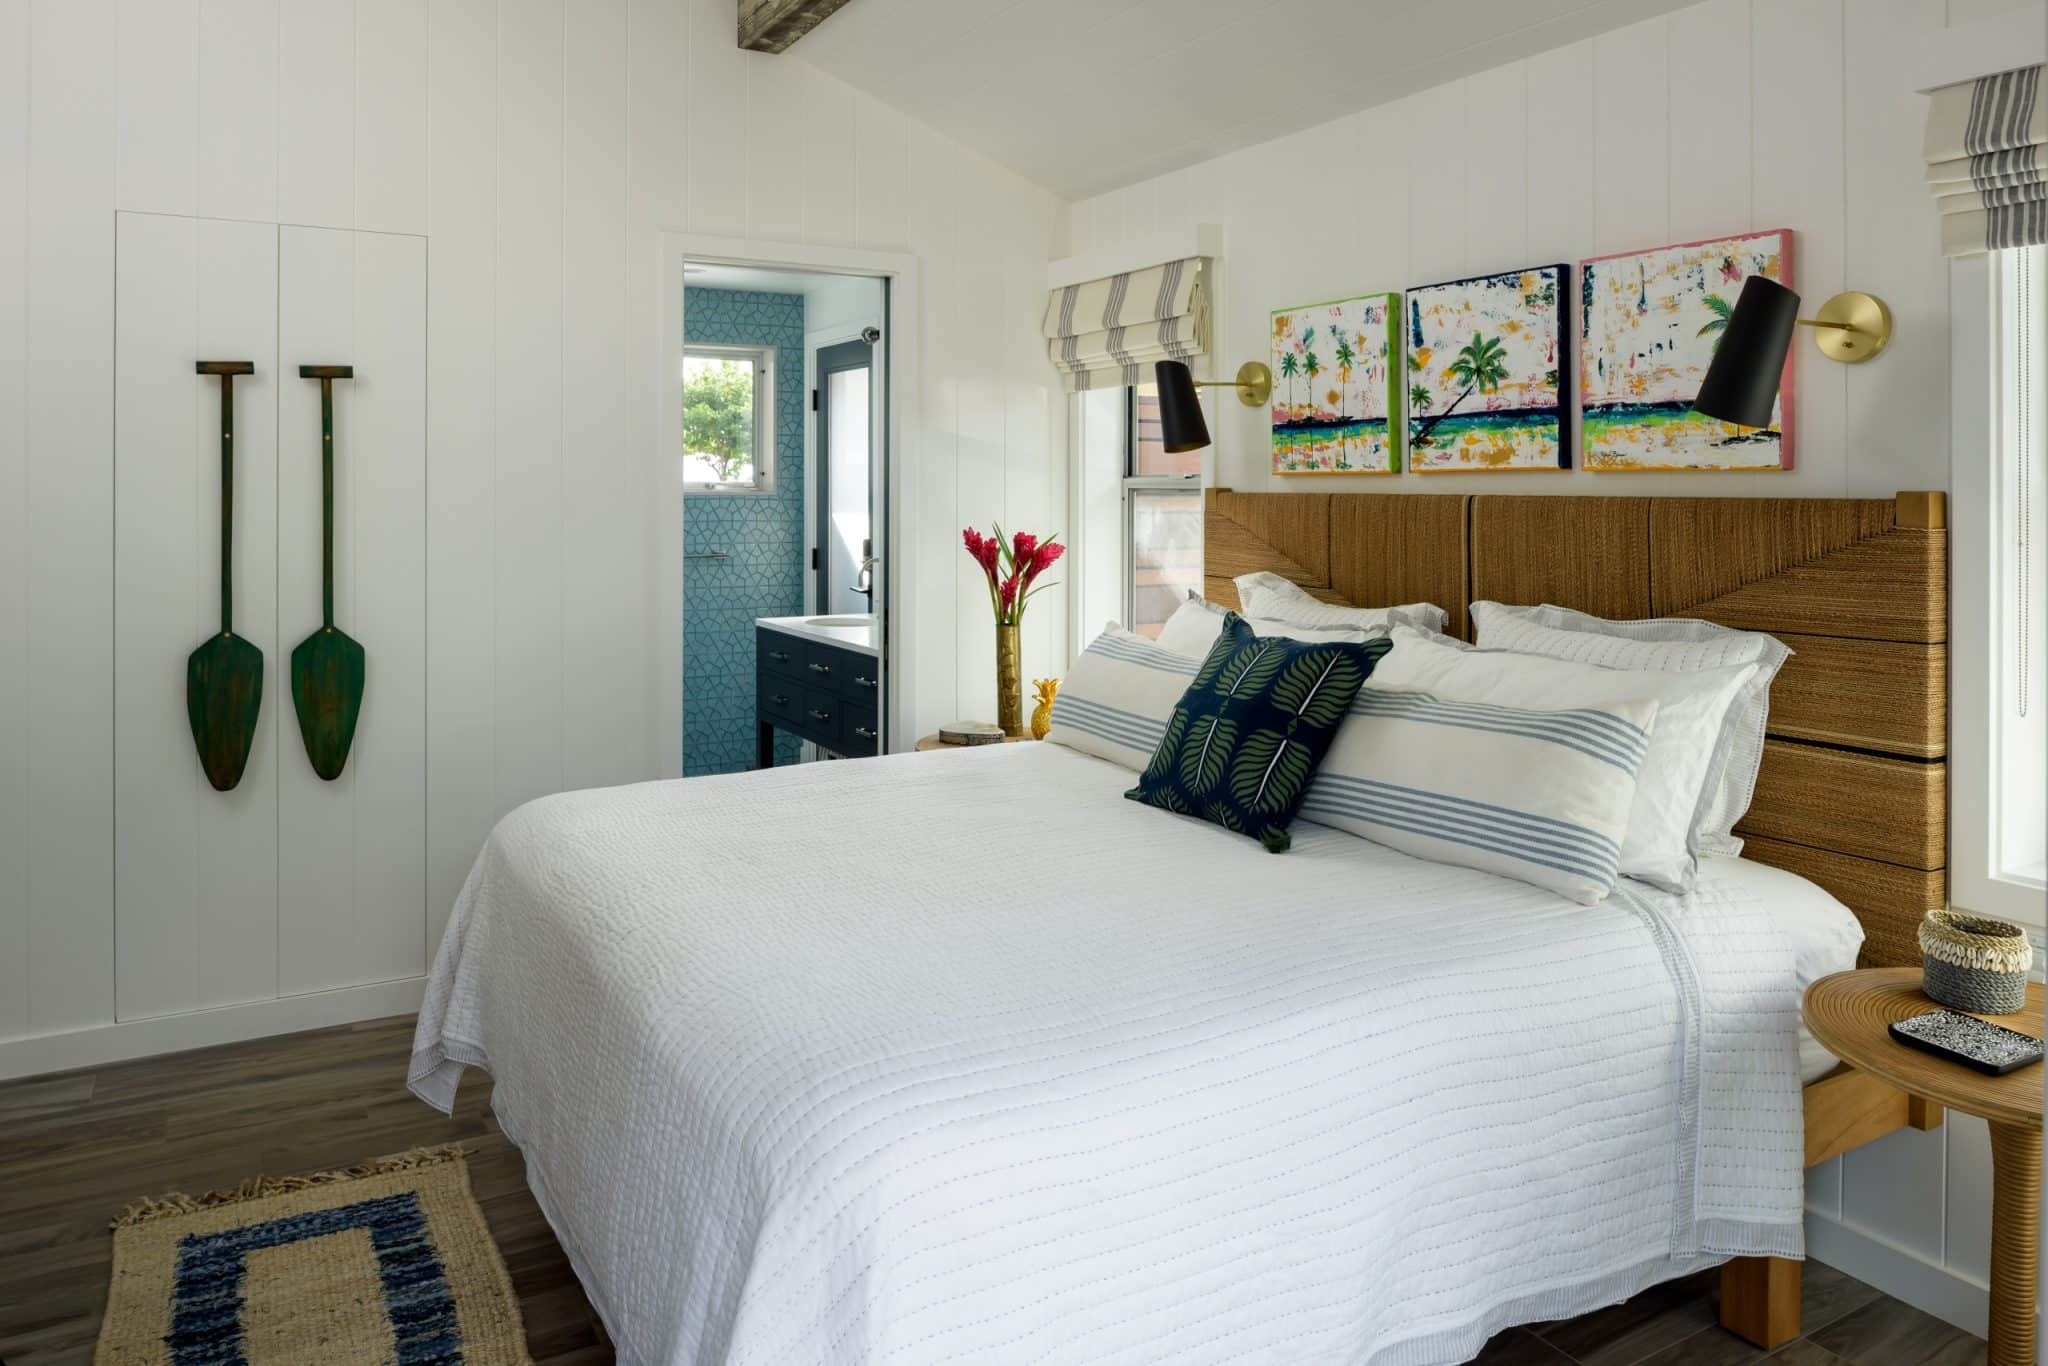 How to Incorporate Natural Elements, Like Driftwood or Seashells in a Coastal Bedroom?